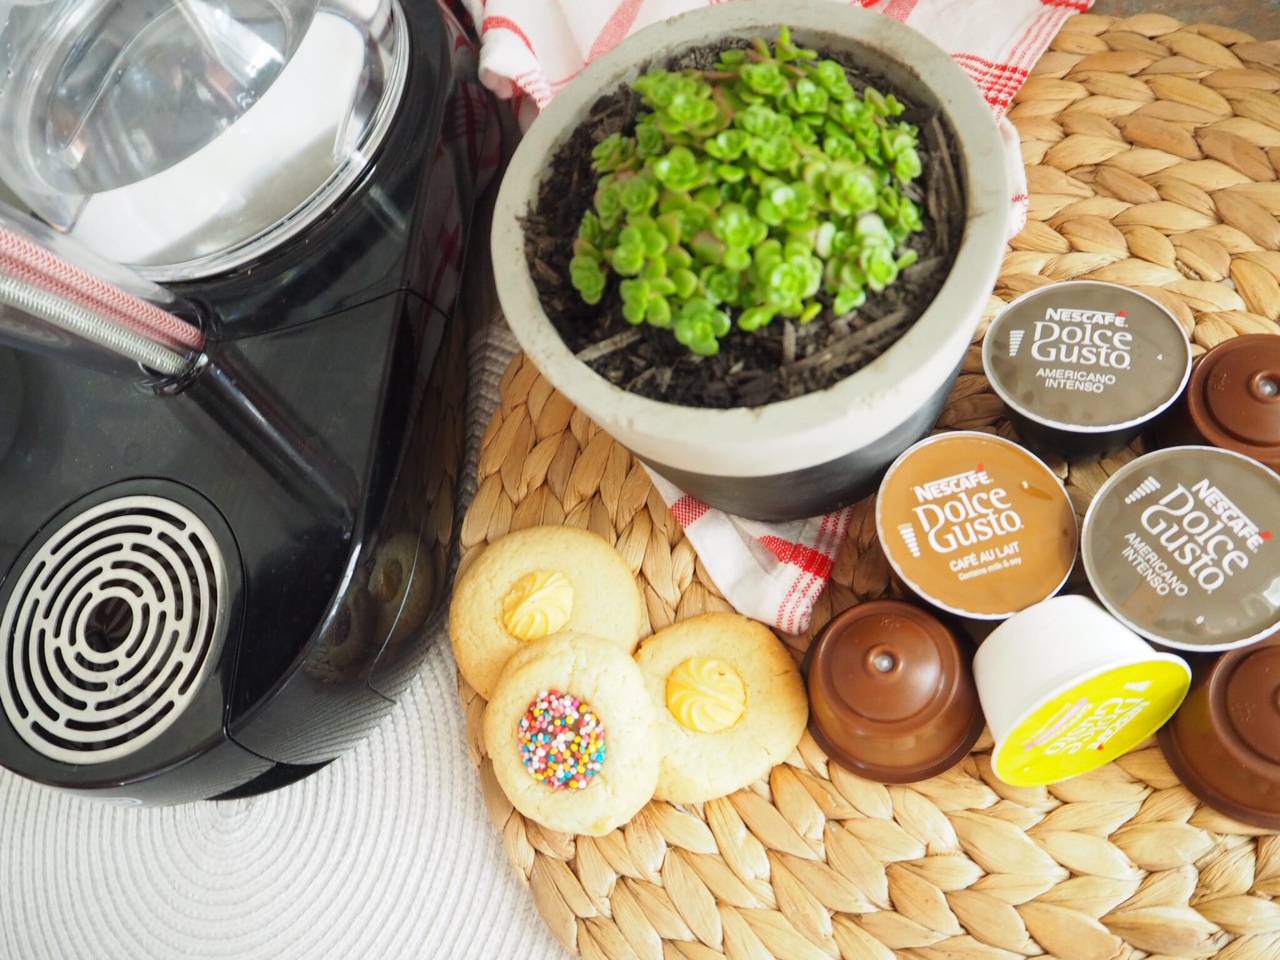 NESCAFÉ® Dolce Gusto® Capsule Free Recycling Programme · TerraCycle